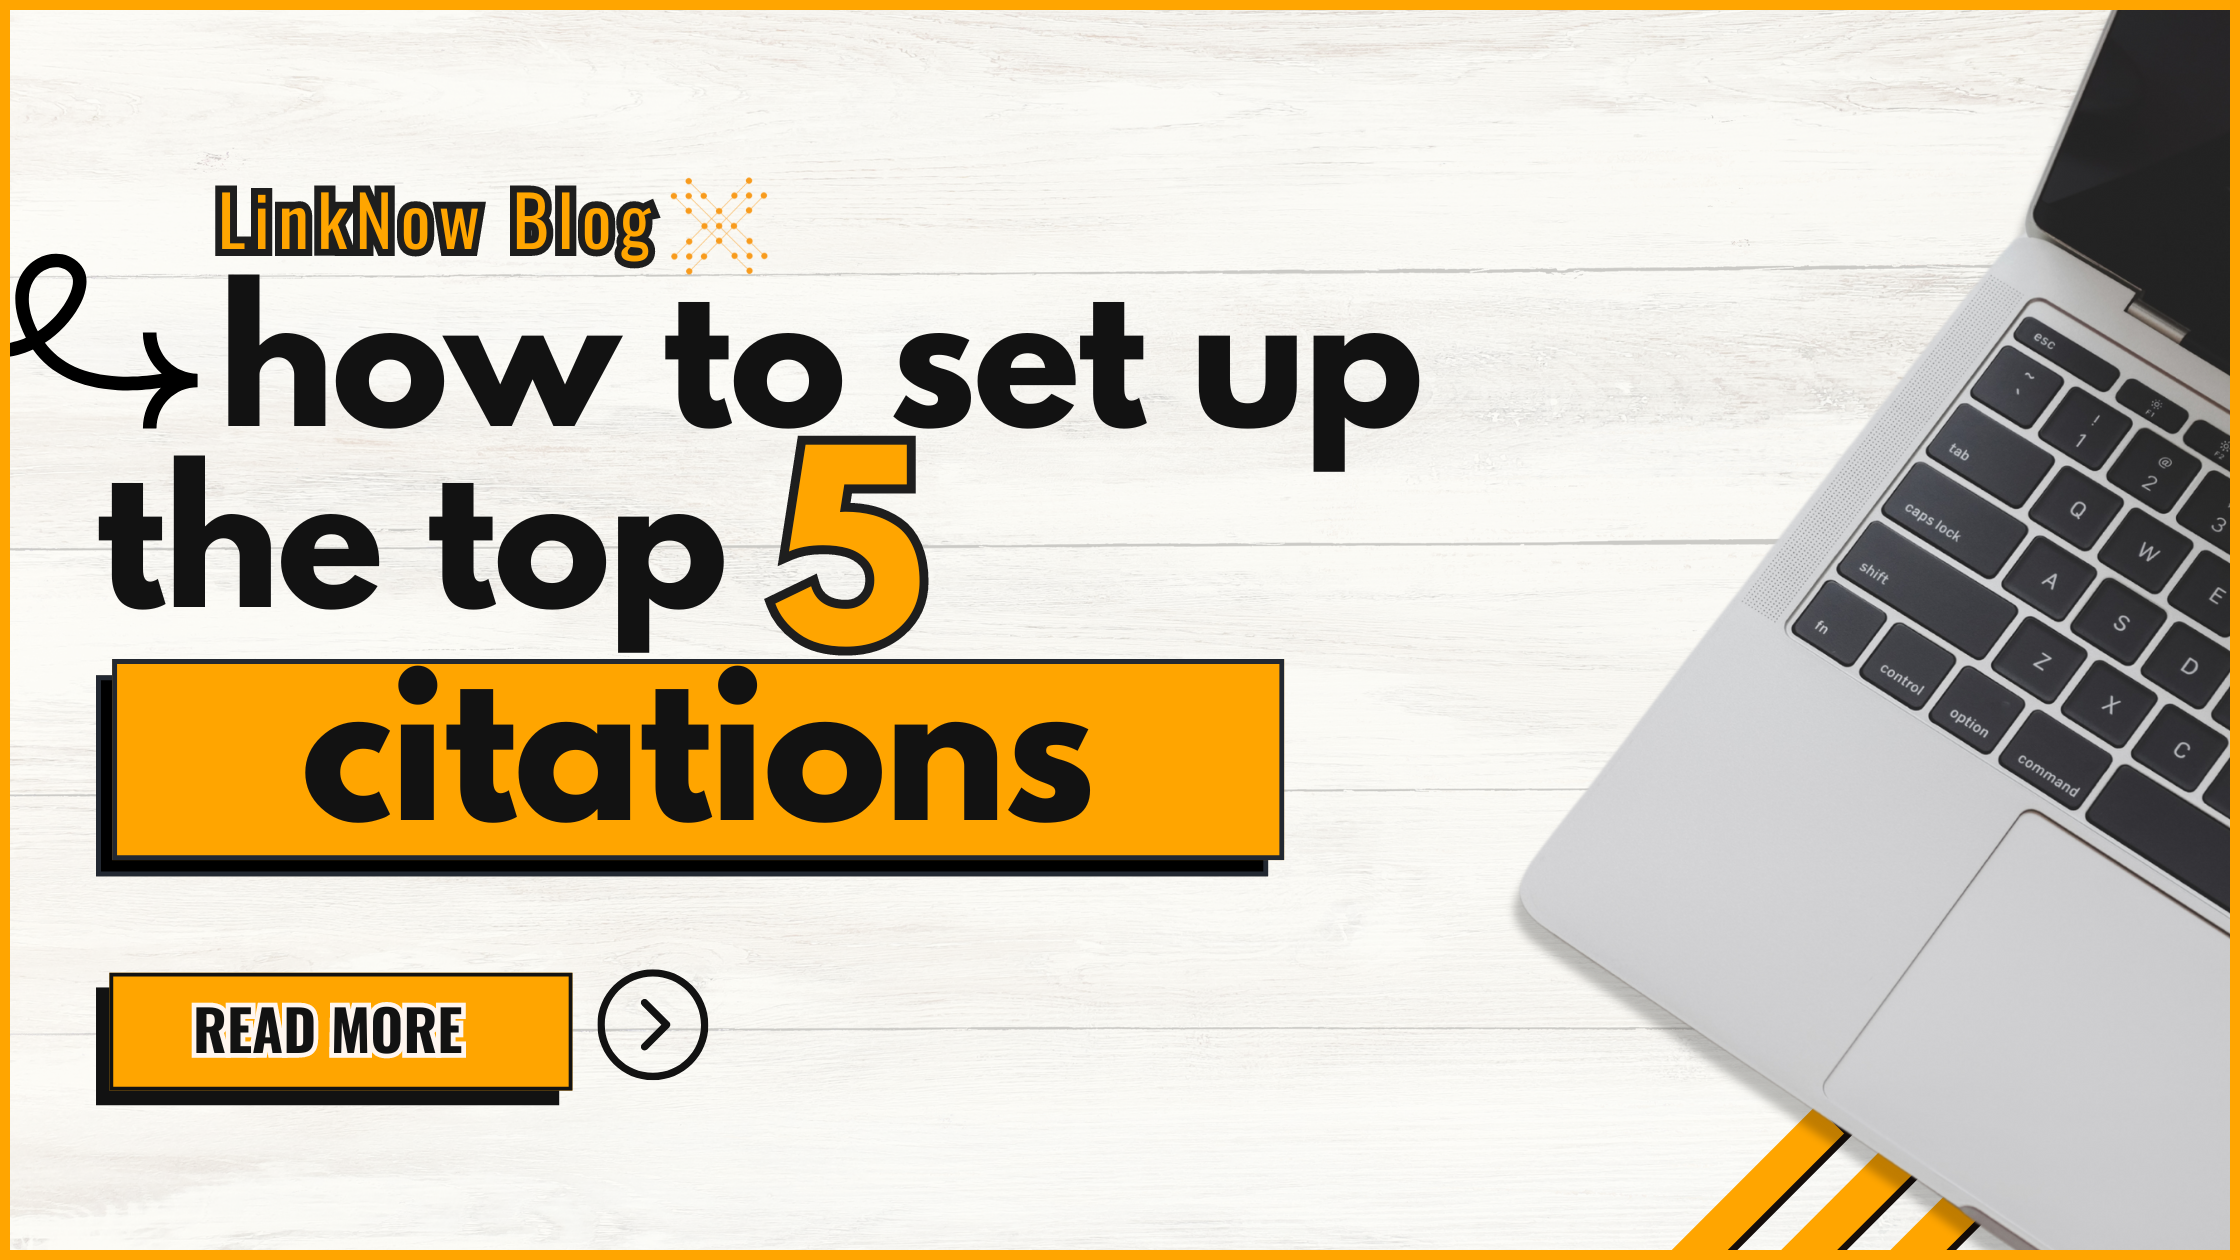 How to Set Up the Top 5 Citations